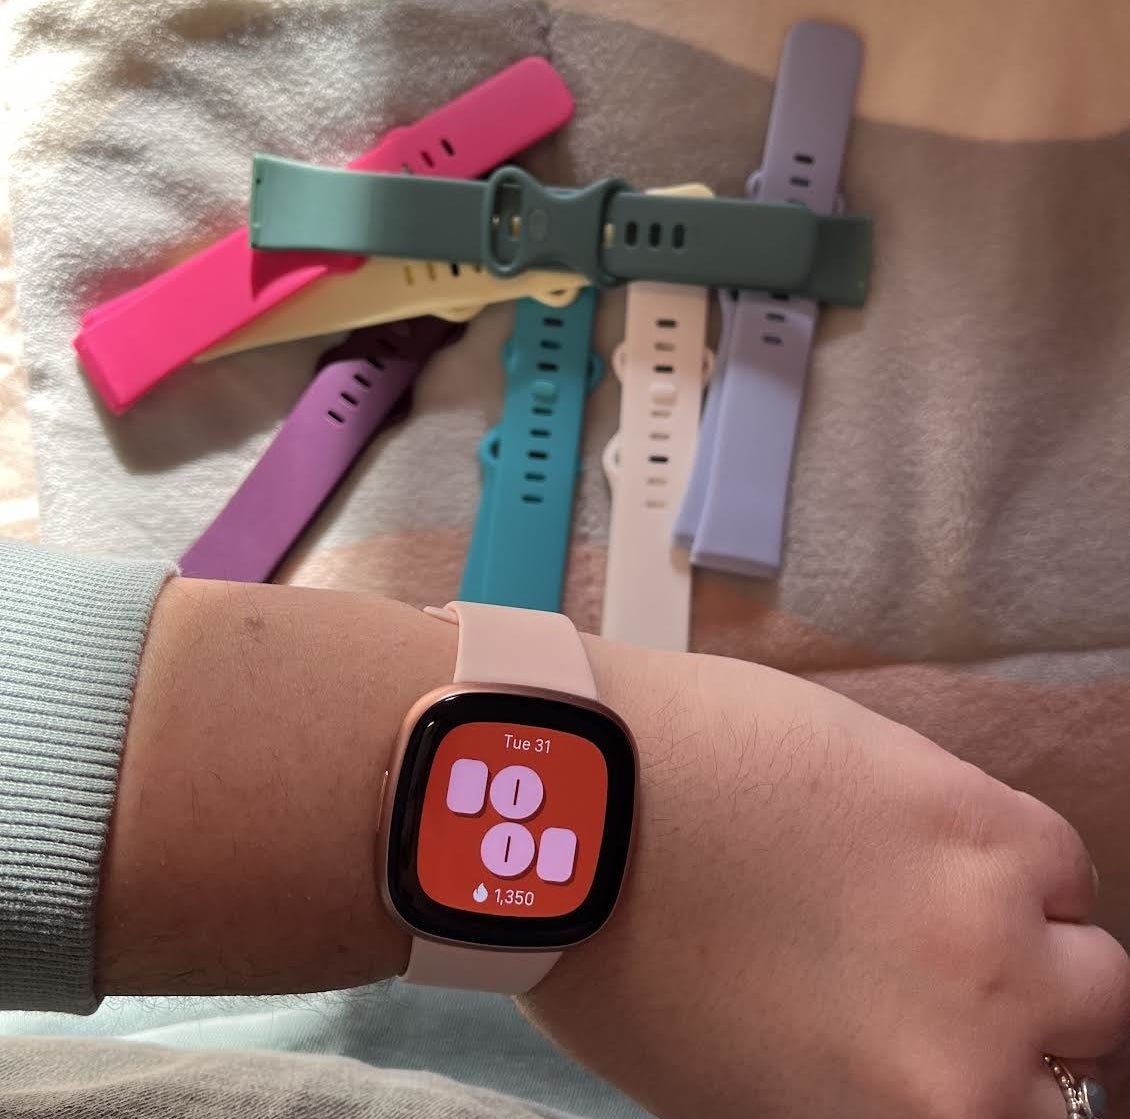 Bianca showing off the watch with different bands in the background